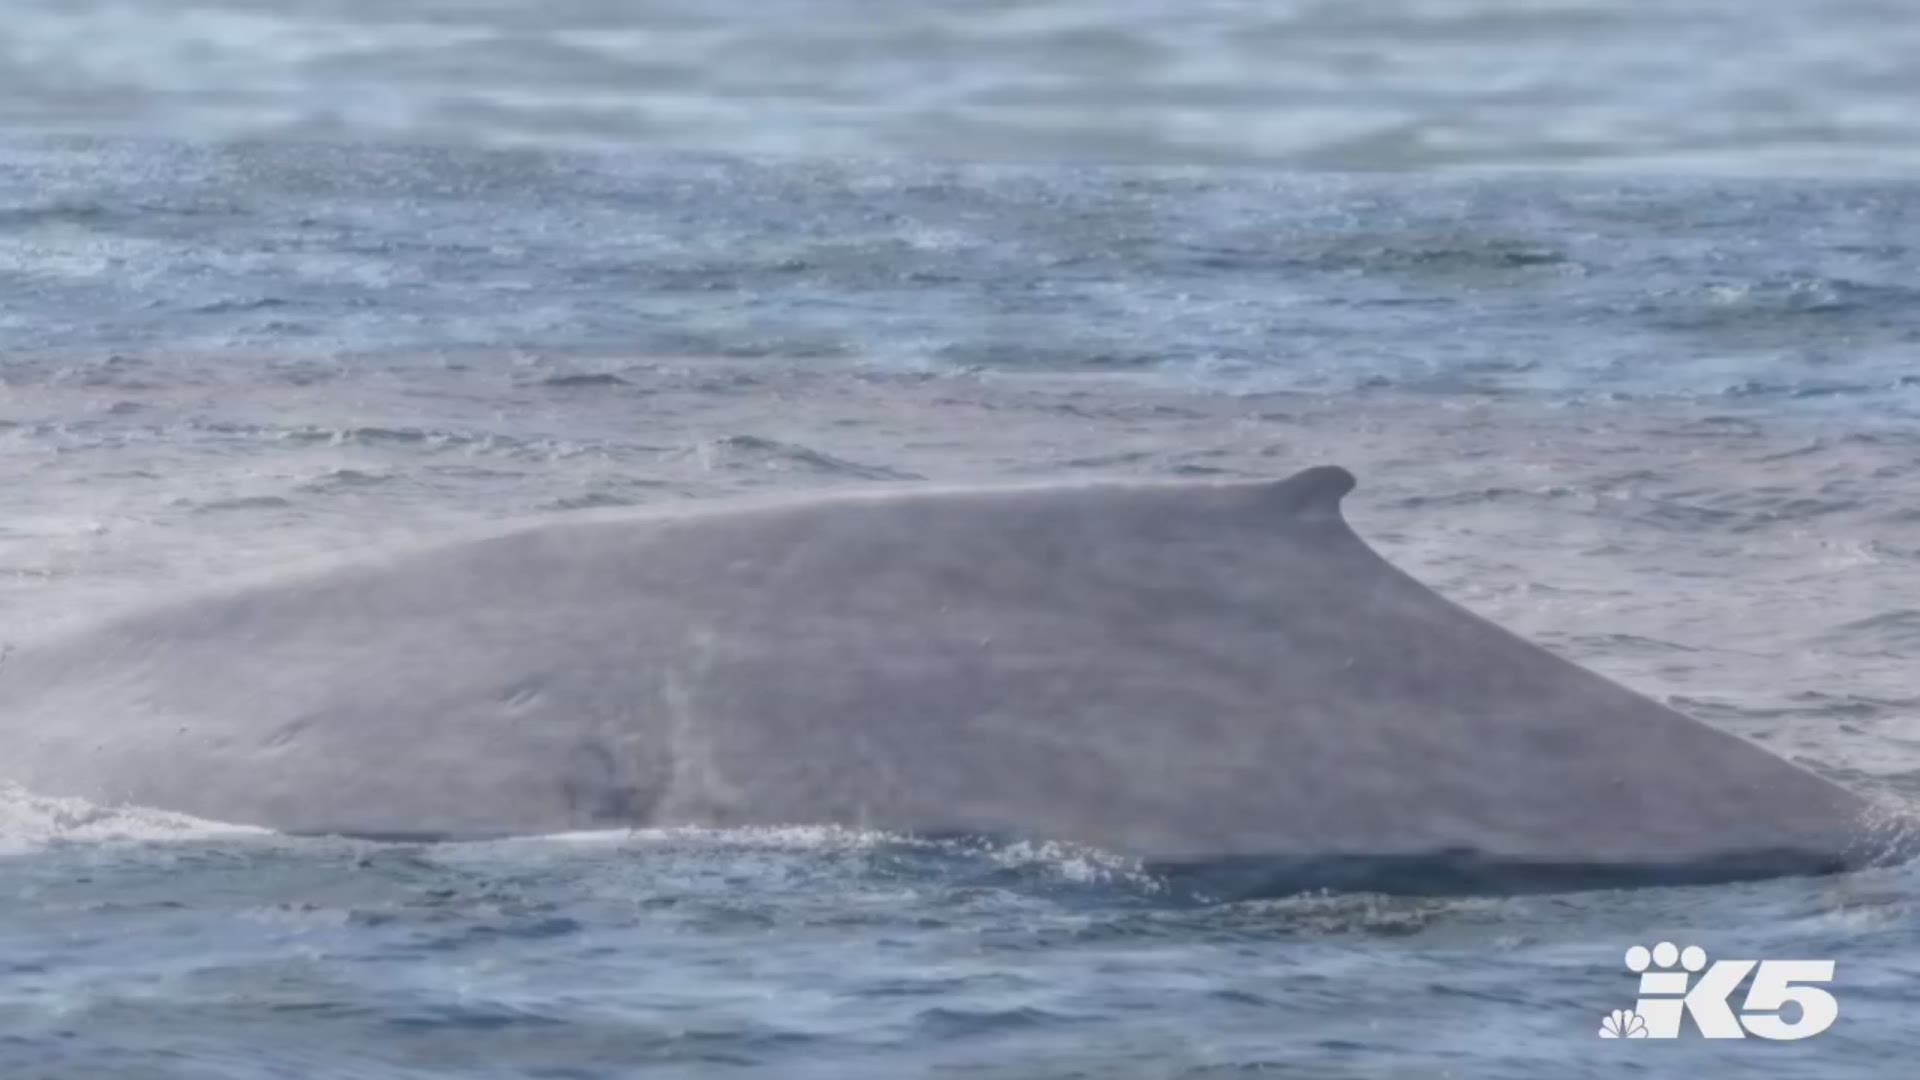 Two blue whales were spotted off the coast of Washington in late July. Photos courtesy of Cascadia Research/John Calambokidis